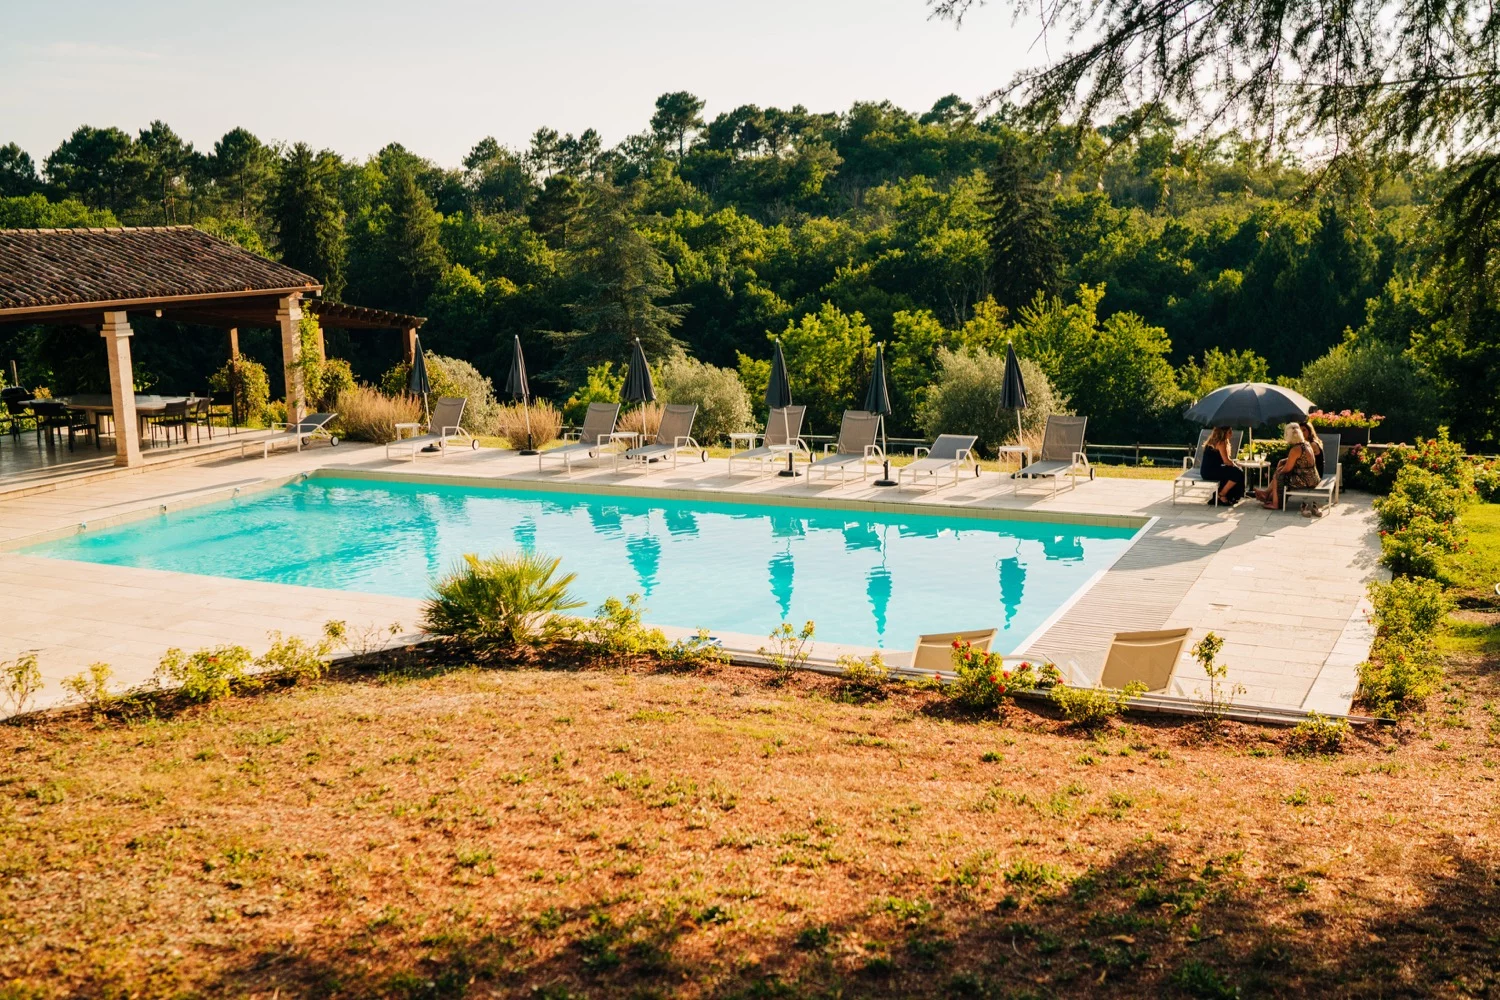 An outdoor pool surrounded by beautiful nature in France at Domaine La Fauconnie, photo captured by Magic Wedding Photographer in Europe.